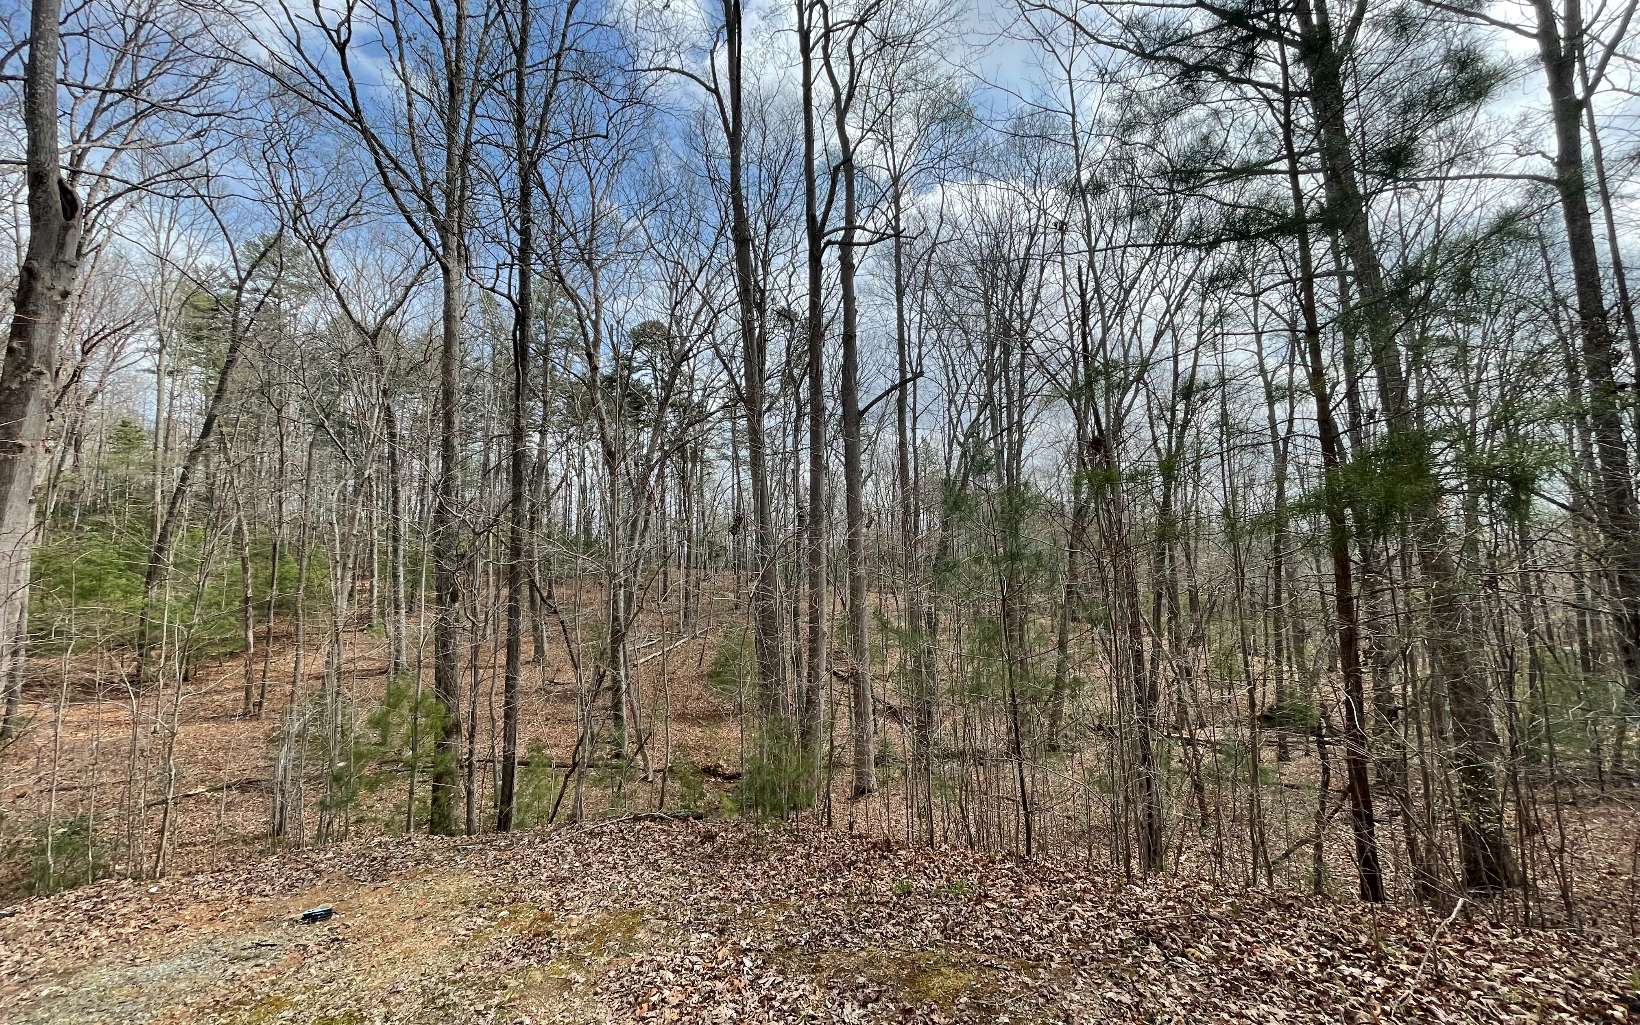 BEAUTIFULLY WOODED LOT IN THE NORTH GEORGIA MOUNTAINS!! This 1.7 acre lot located in Pinnacle Point in Blairsville, Georgia borders the USFS and offers paved roads, underground utilities, gated entrance. Spring Head located on lower corner of lot. Tons of beautiful hardwoods throughout. Conveniently located between Blue Ridge and Blairsville, hiking trails, Lake Nottely or Lake Blue Ridge. THE PERFECT PLACE TO BUILD YOUR HOME IN THE NORTH GEORGIA MOUNTAINS!